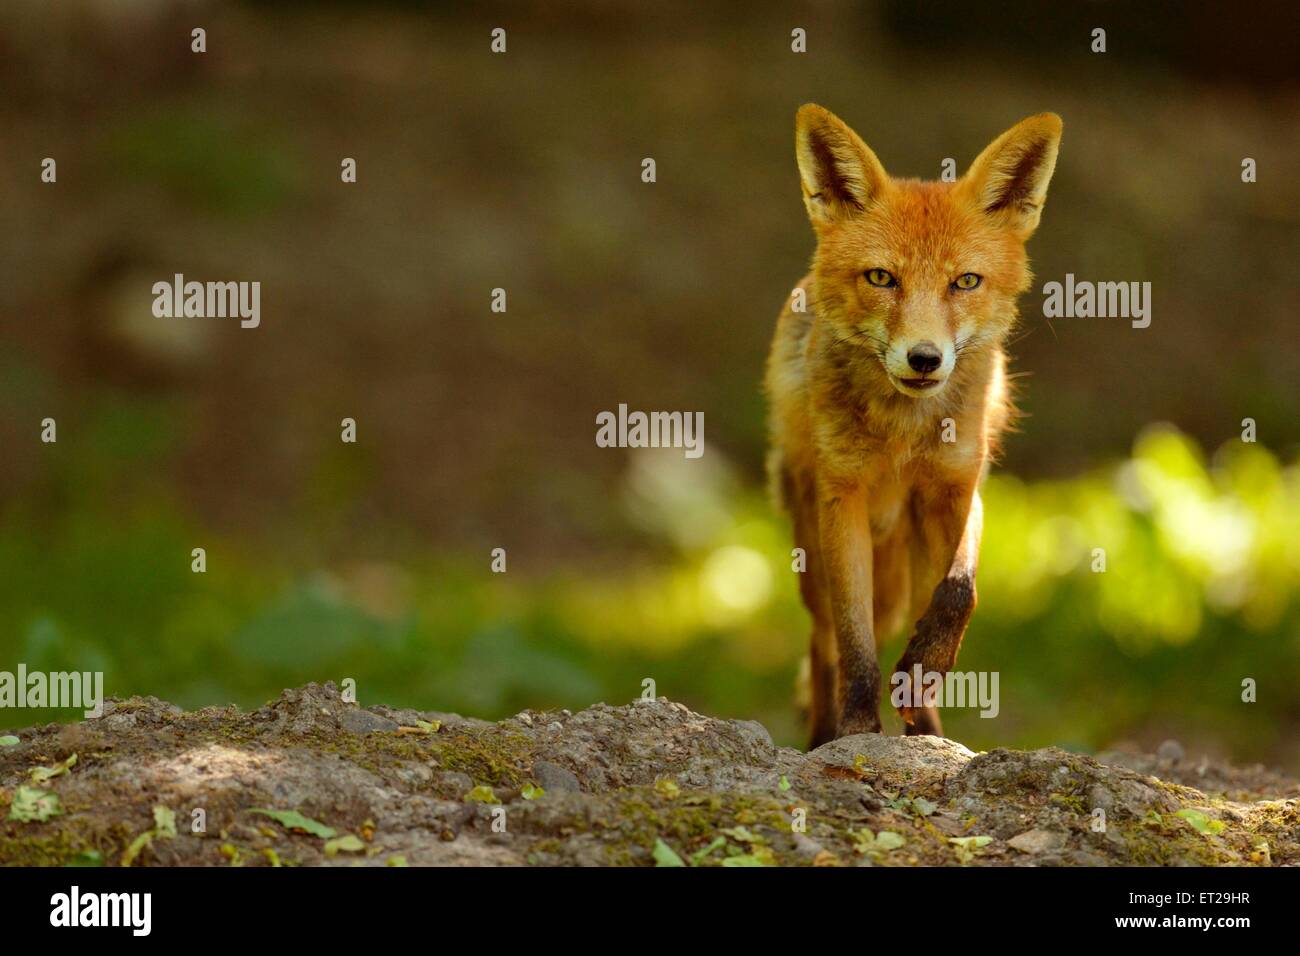 Adult Red Fox (Vulpes vulpes), Canton of Basel, Switzerland Stock Photo